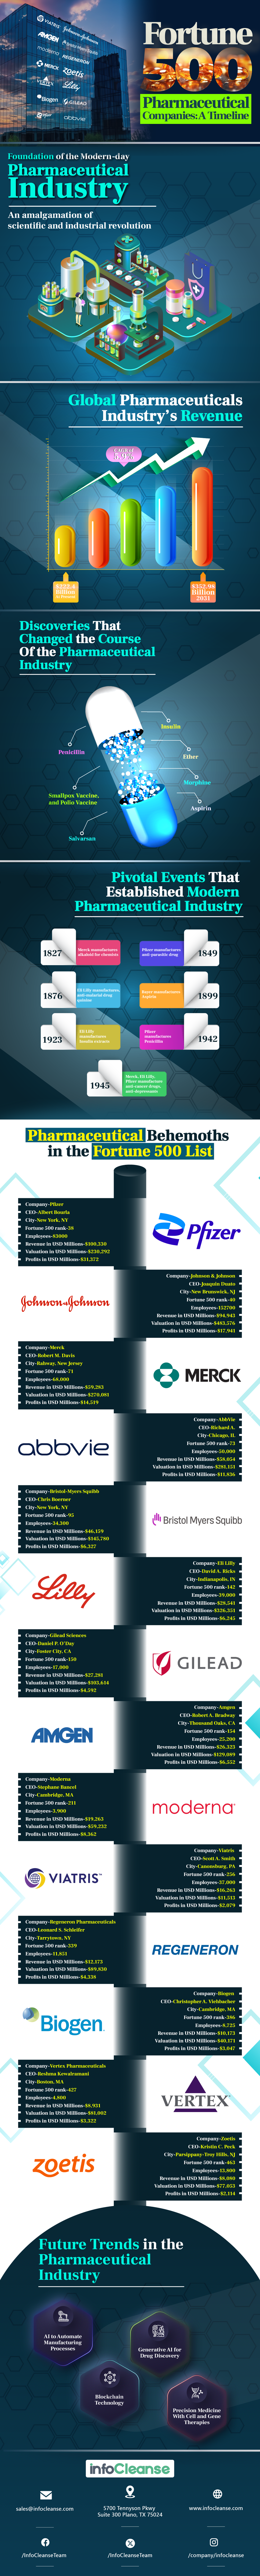 Fortune 500 Pharmaceutical Companies A Timeline-Infographic